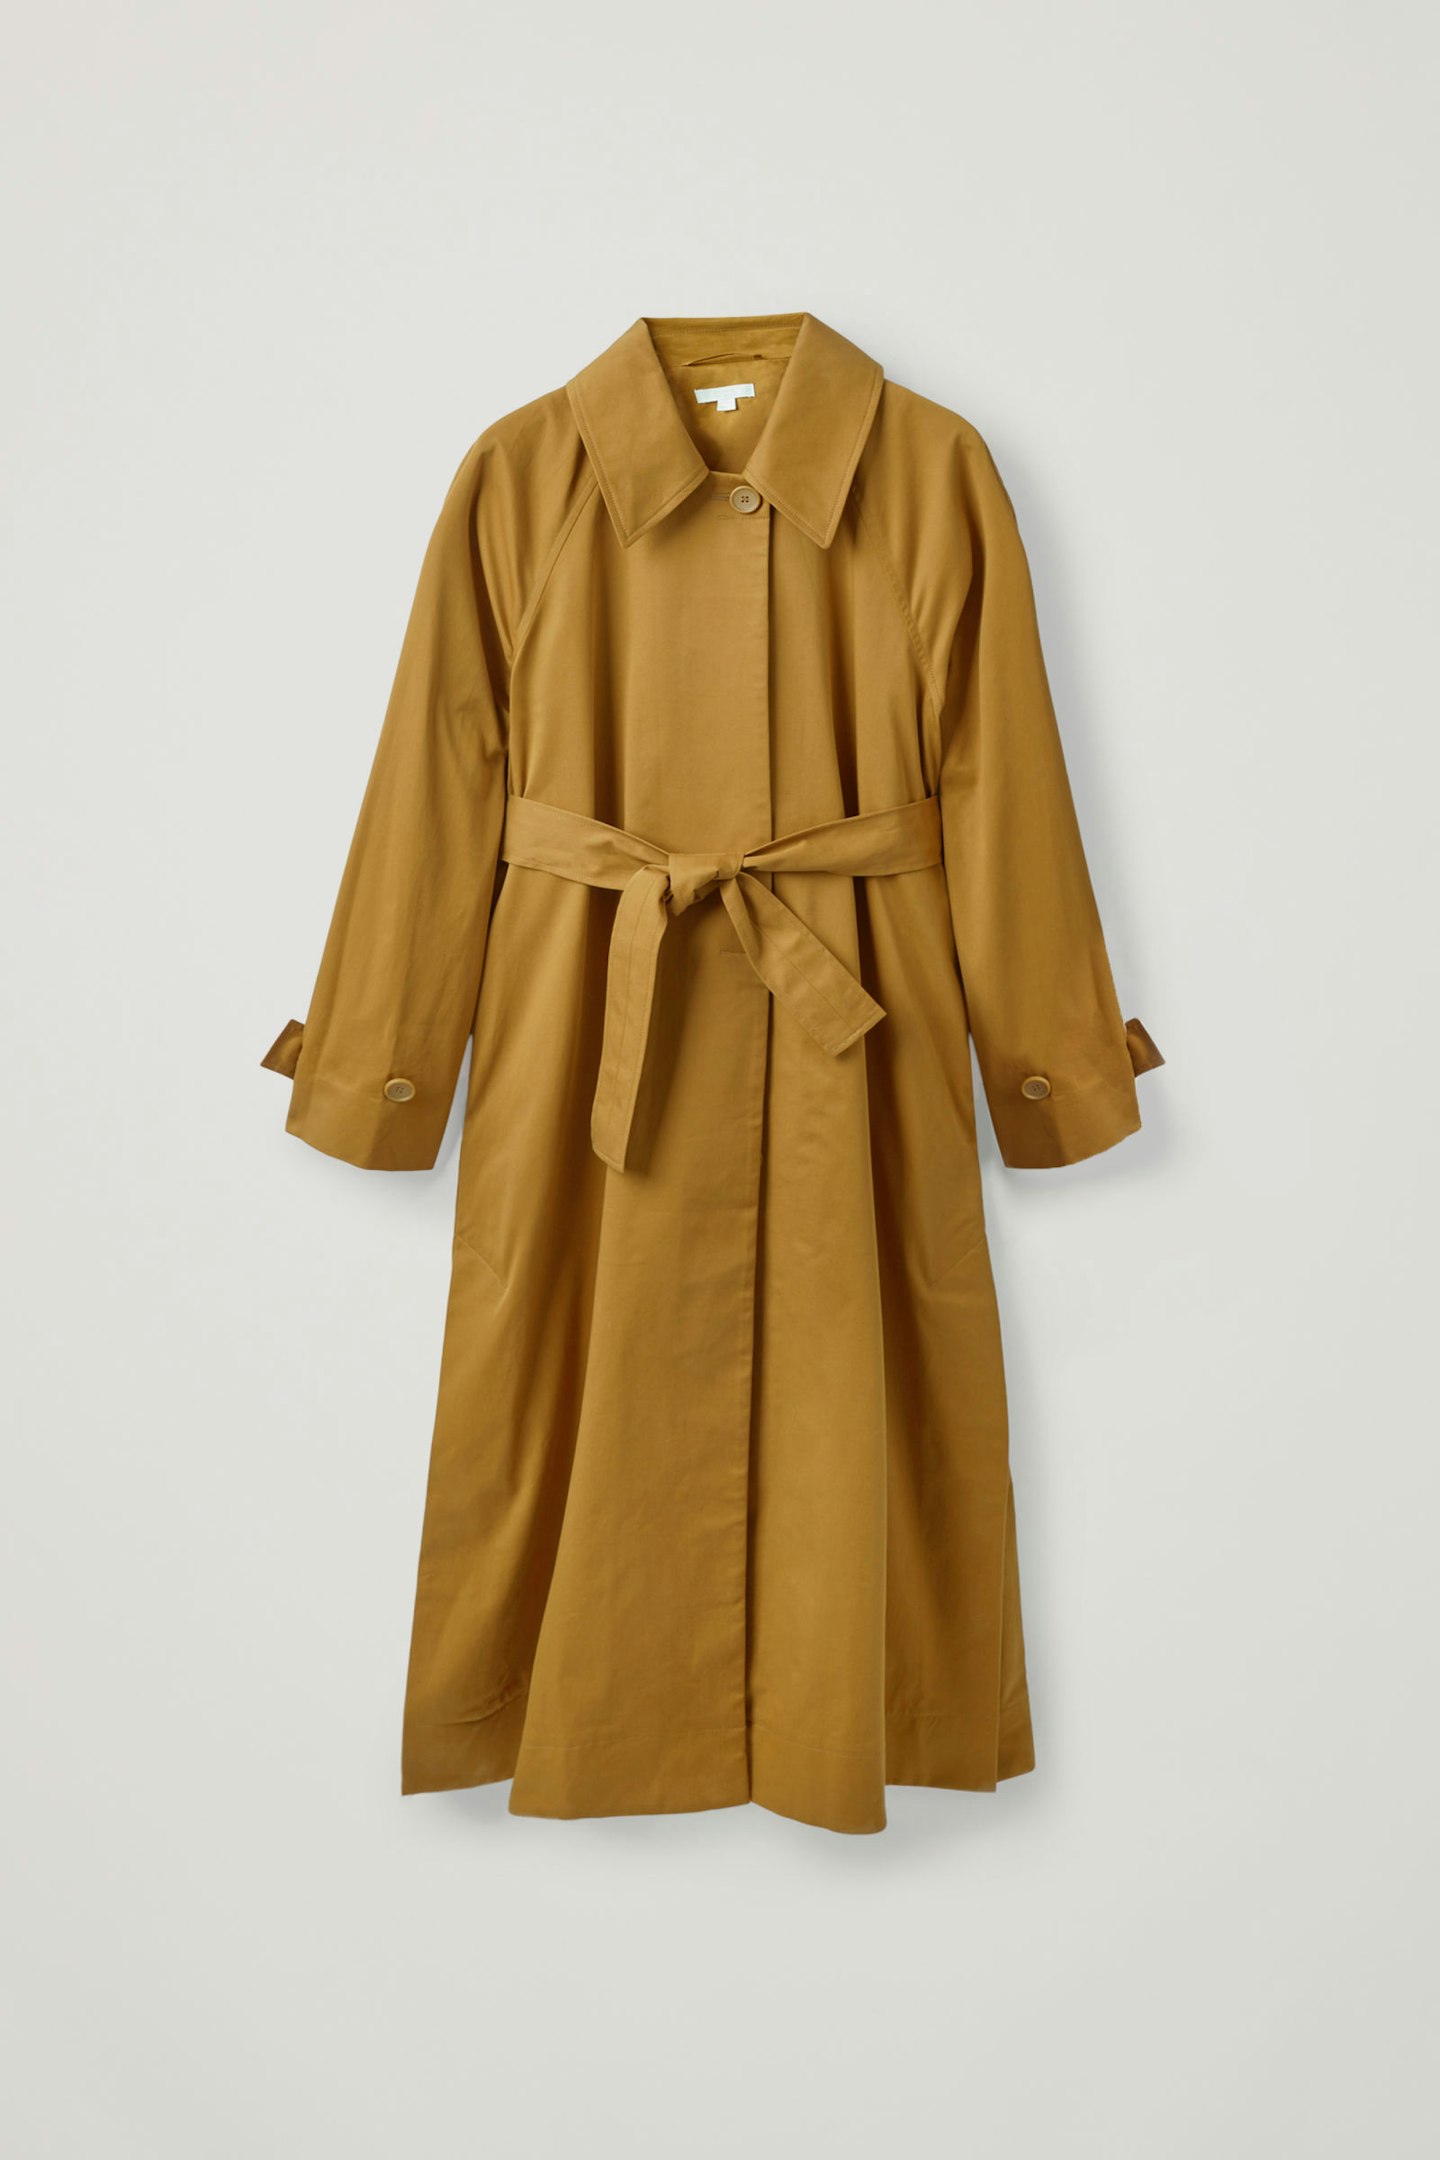 COS, Cotton Oversized Trench Coat, WAS £150 NOW £75